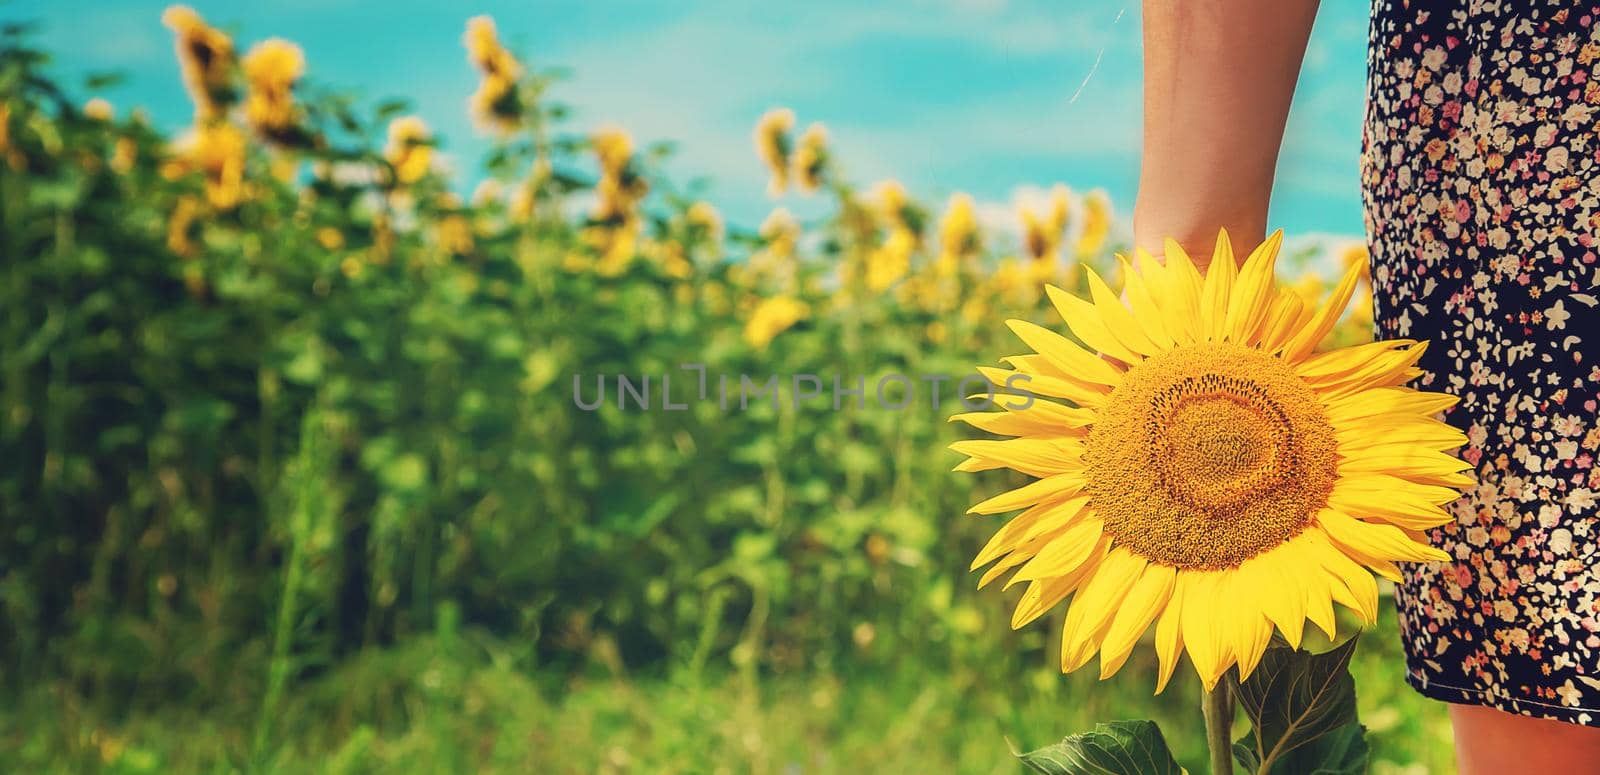 Girl with a sunflower in her hands. Selective focus. nature.